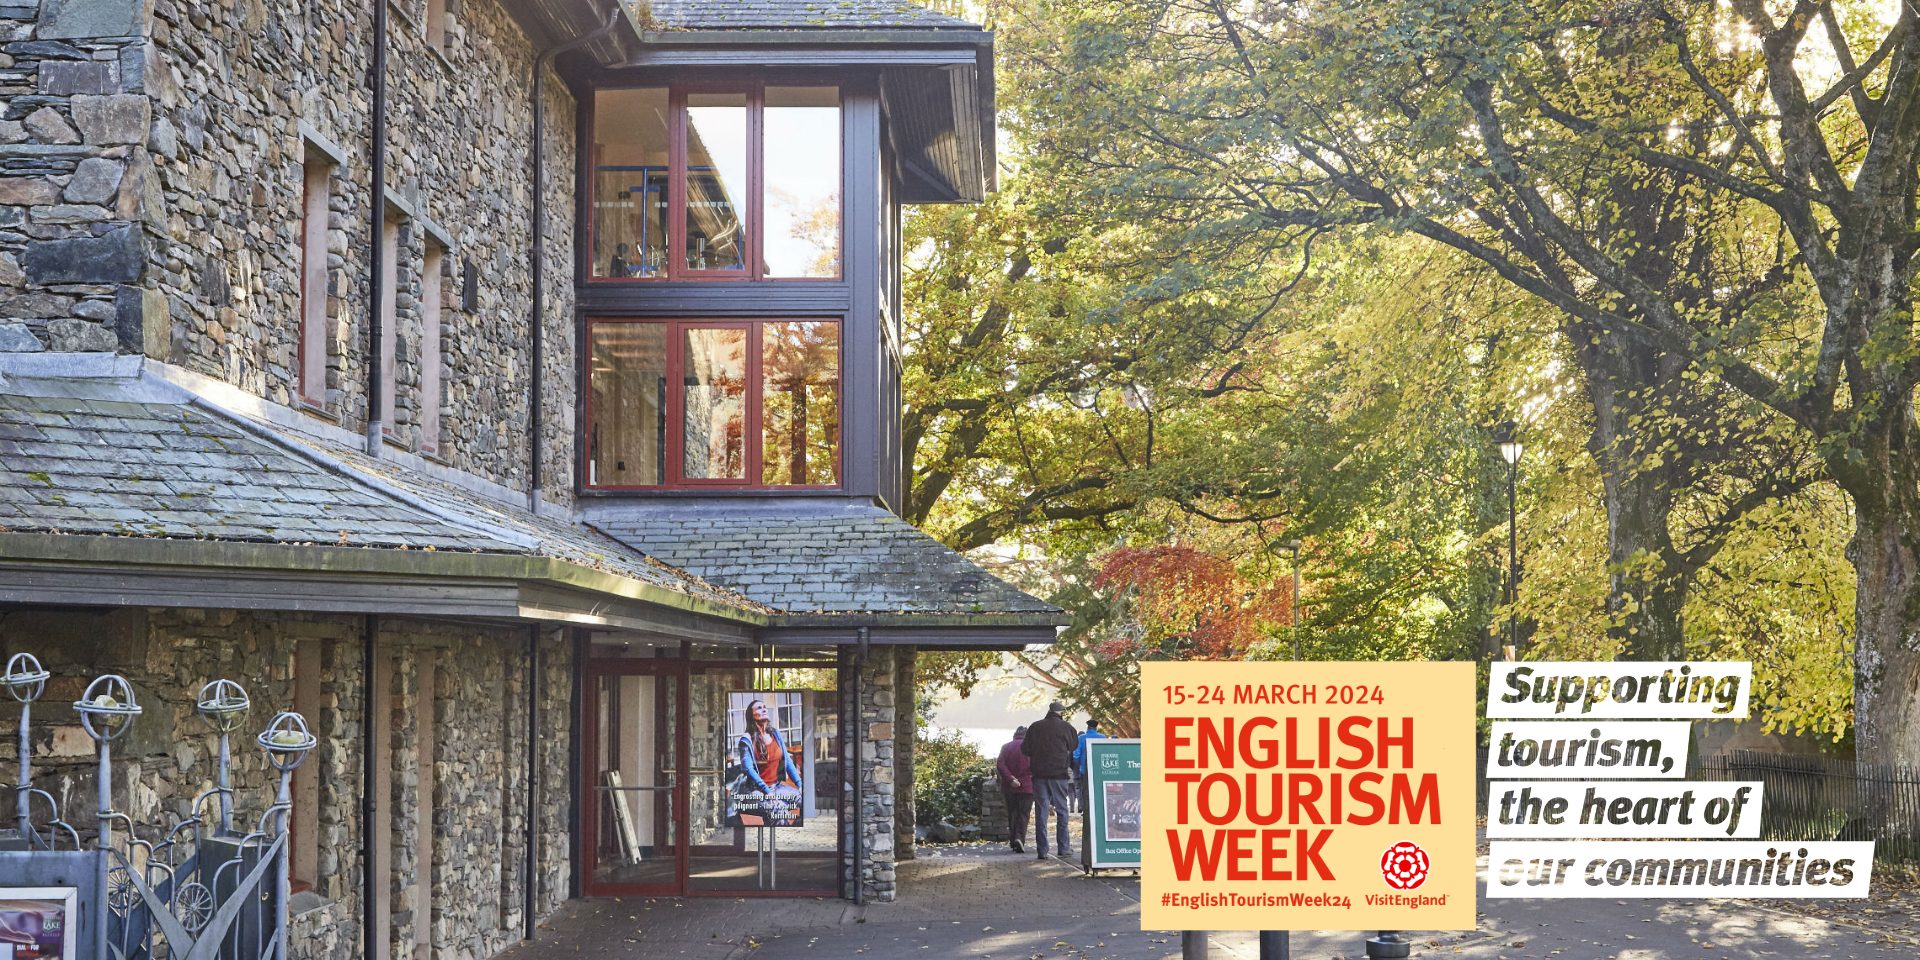 Celebrate English Tourism Week with Theatre by the Lake!